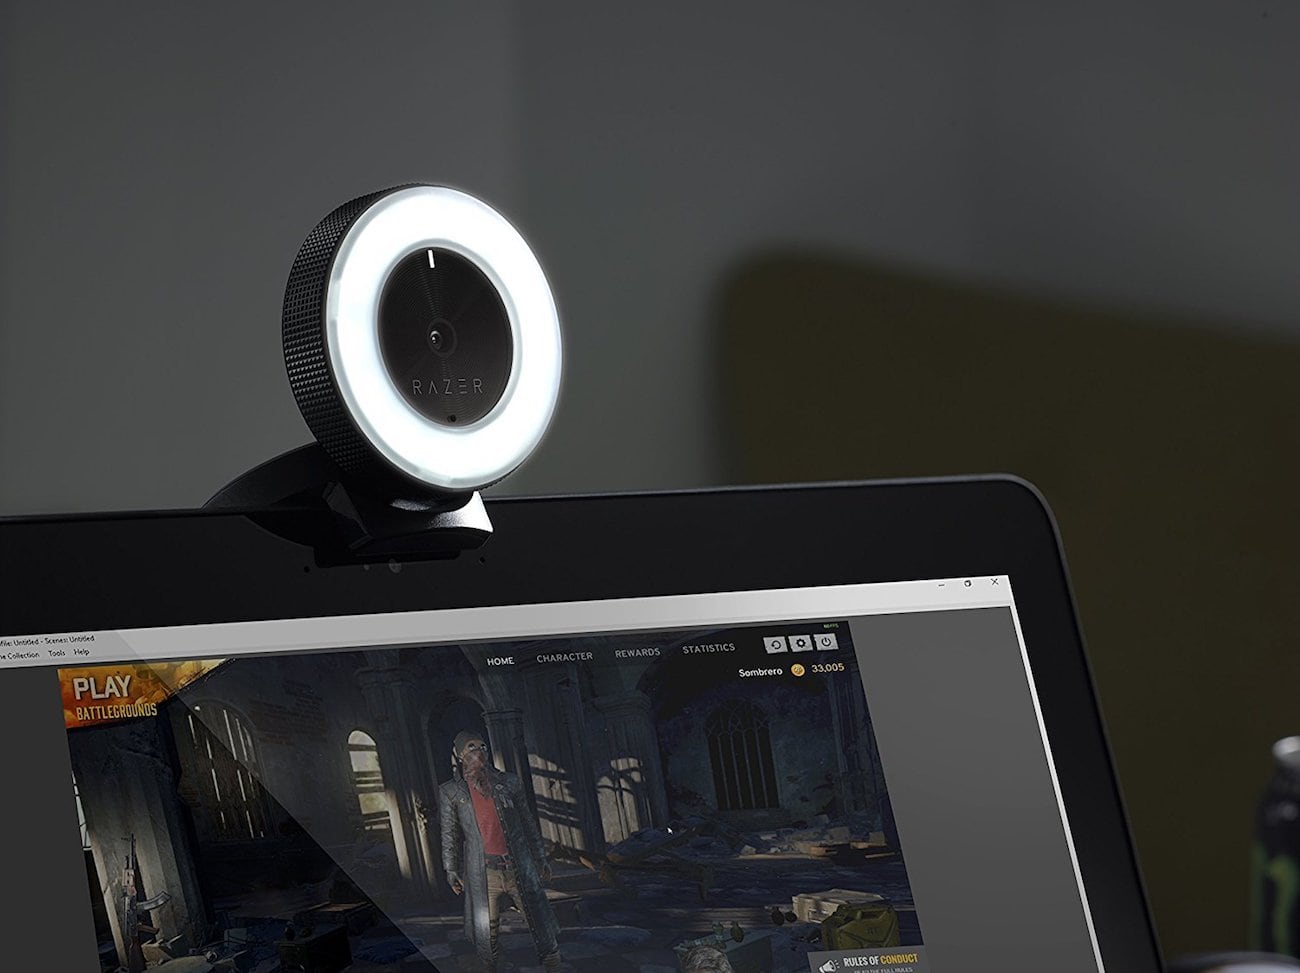 Razer Kiyo streaming webcam comes with a built-in ring light to make you look great